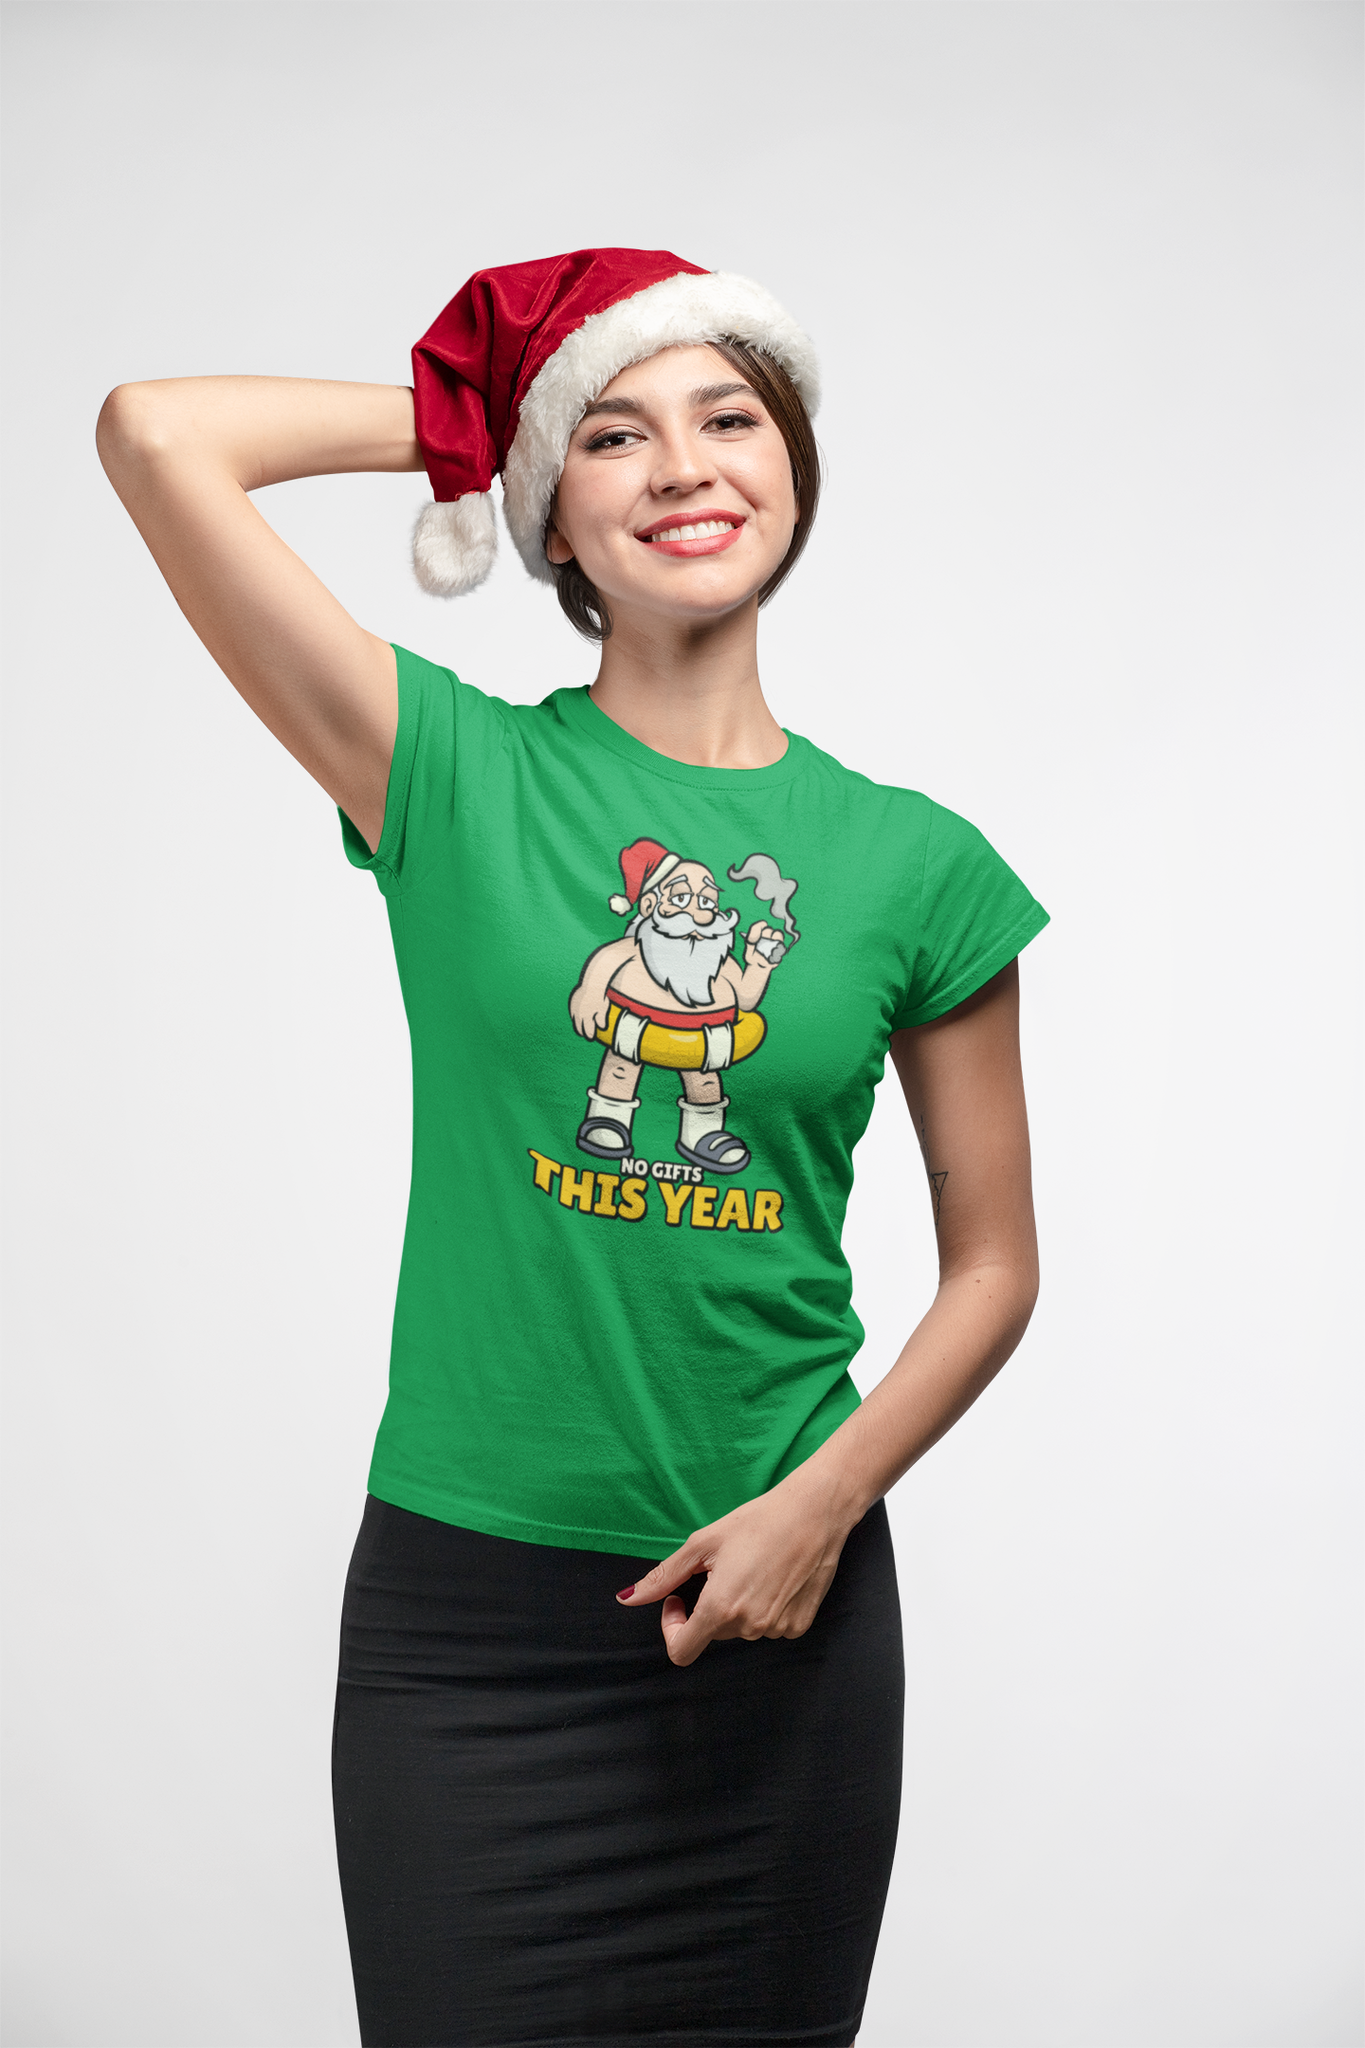 No Gifts This Year T-Shirt Dam - Statements Clothing